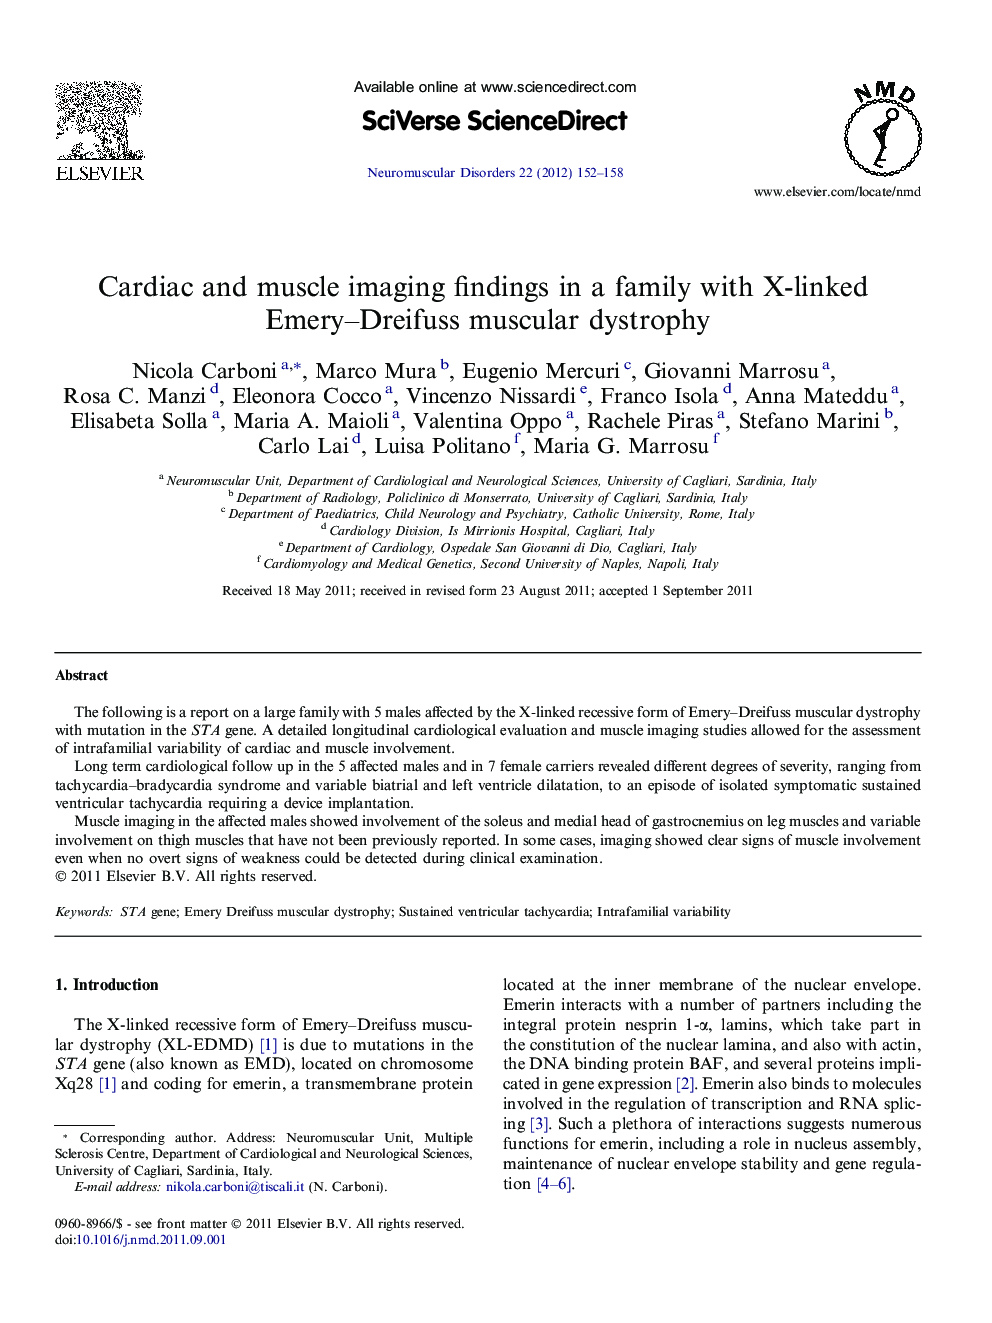 Cardiac and muscle imaging findings in a family with X-linked Emery-Dreifuss muscular dystrophy